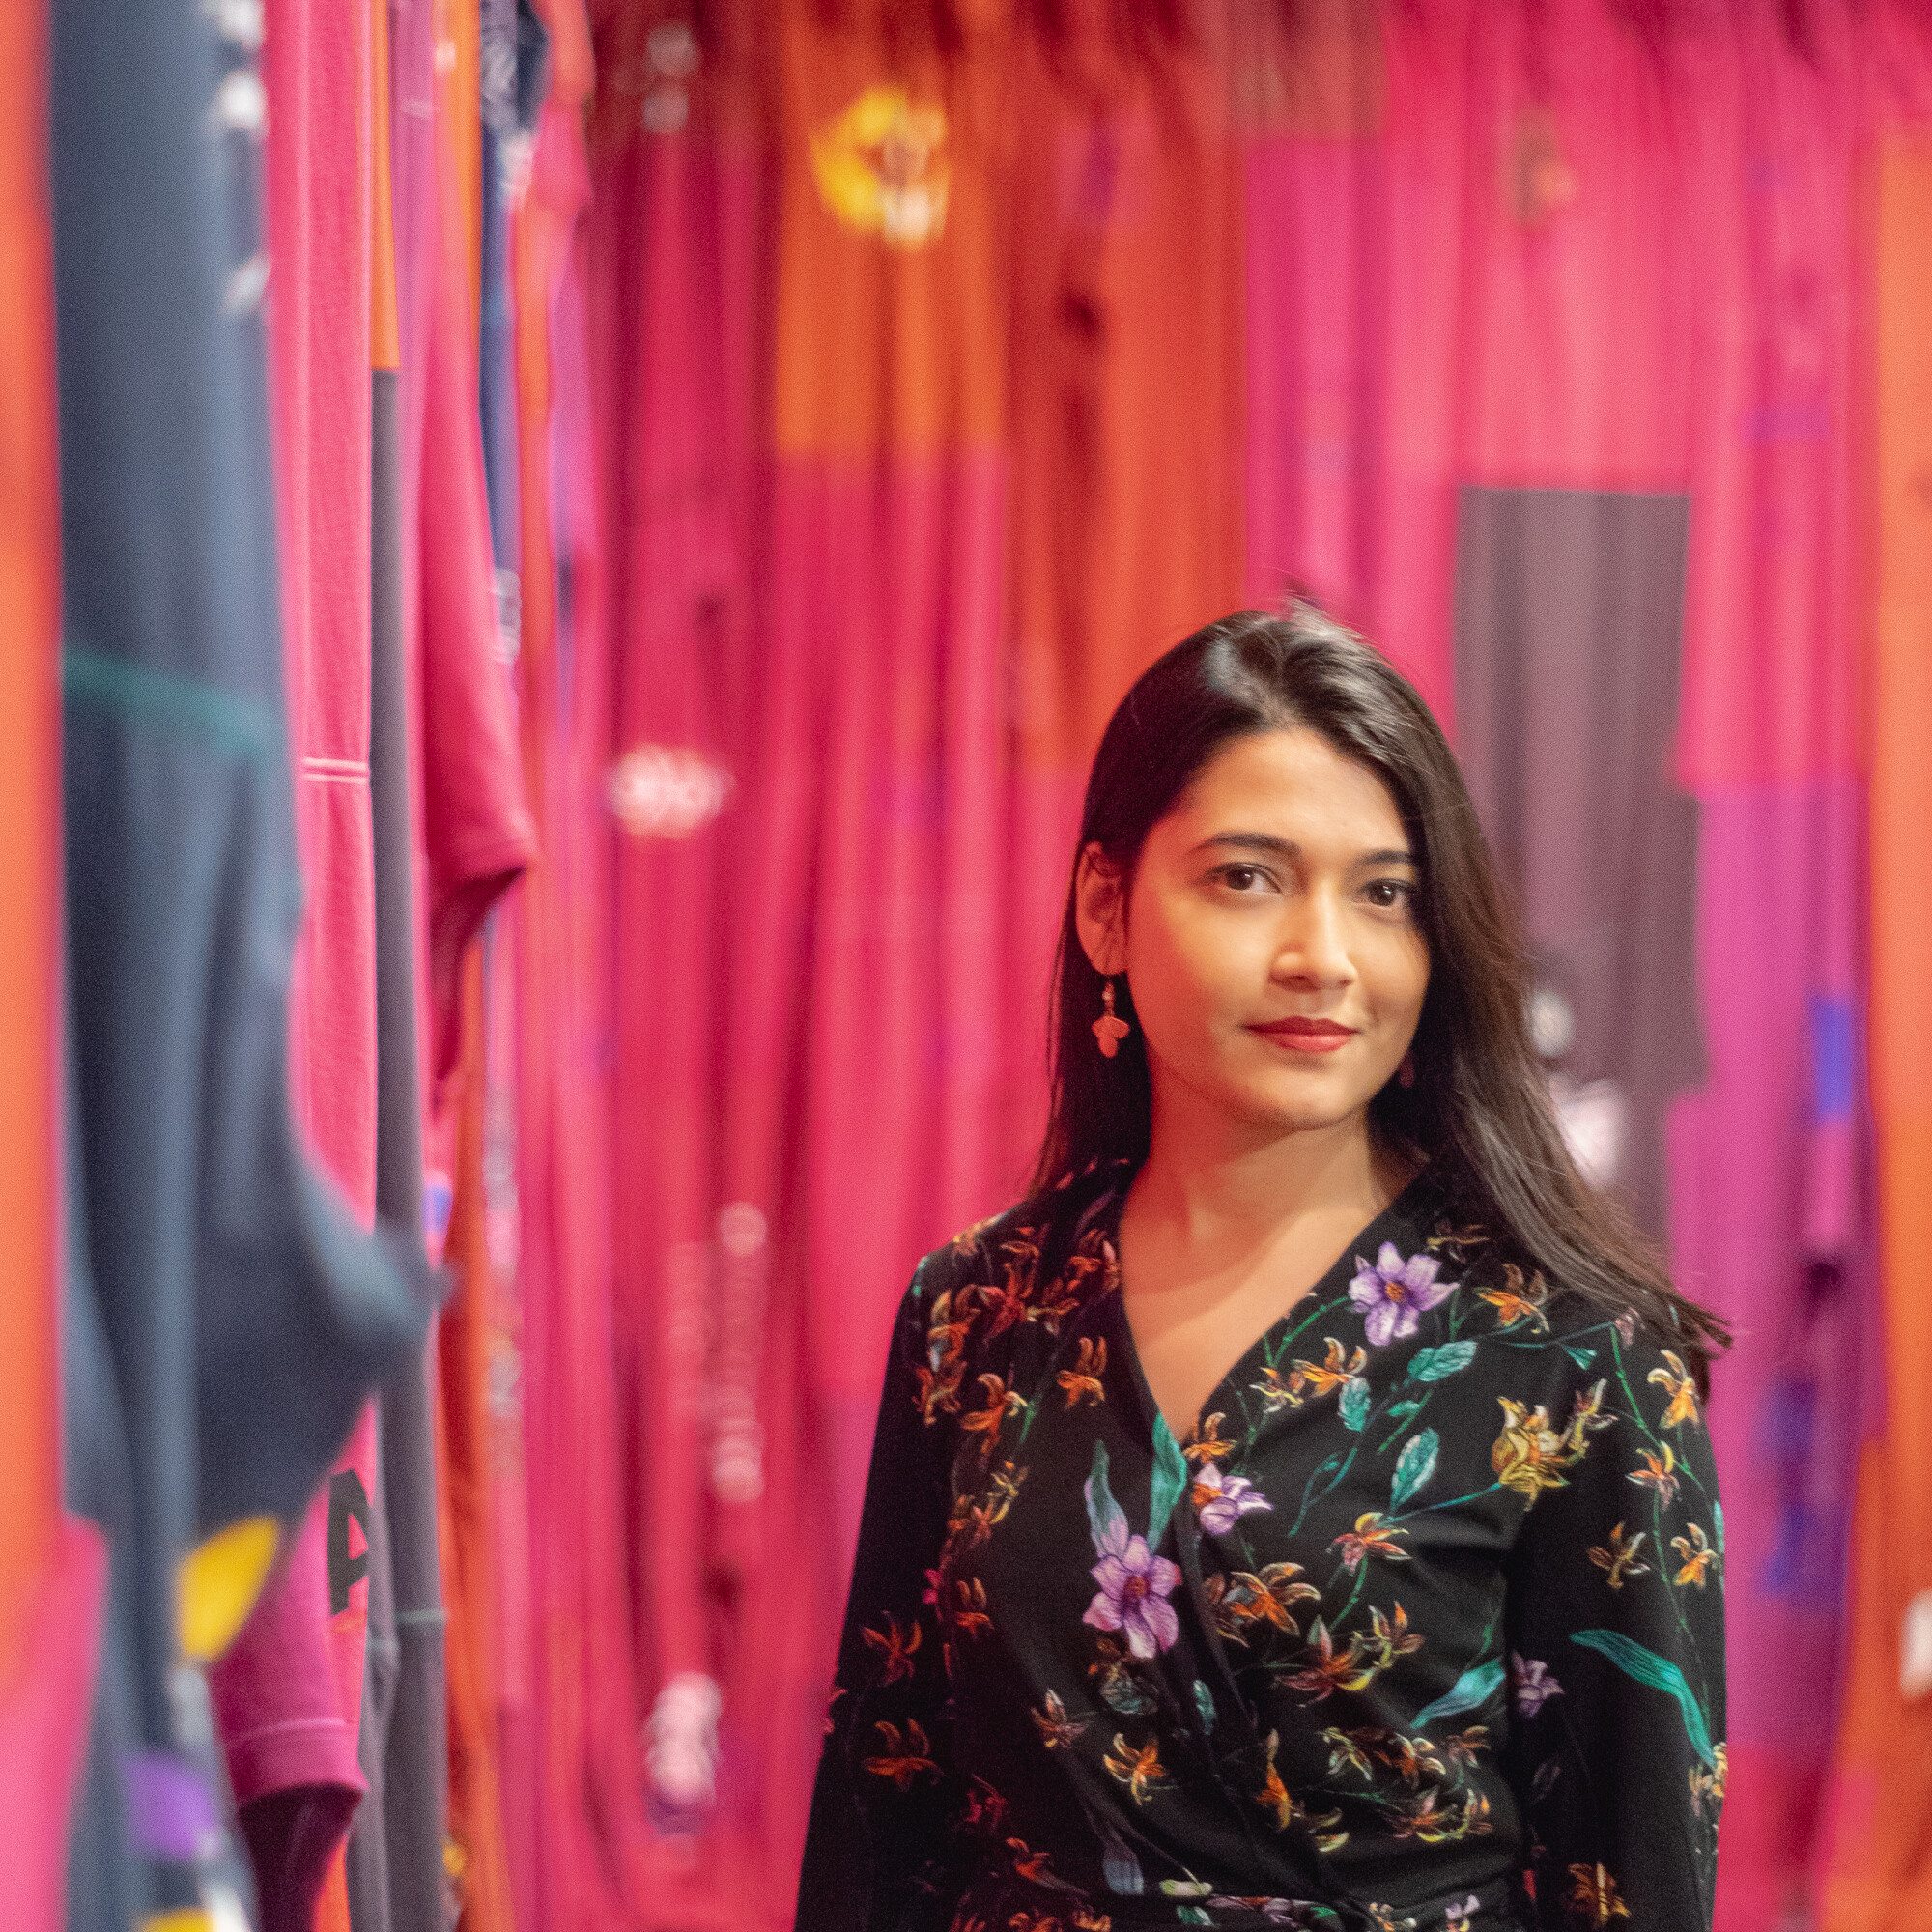 A photograph shows a woman with a medium skin tone and long black hair wearing a black blouse with a colorful floral print. Her head is slightly tilted to the right and she is smiling softly. In the background is a wall covered in pink and red textiles.